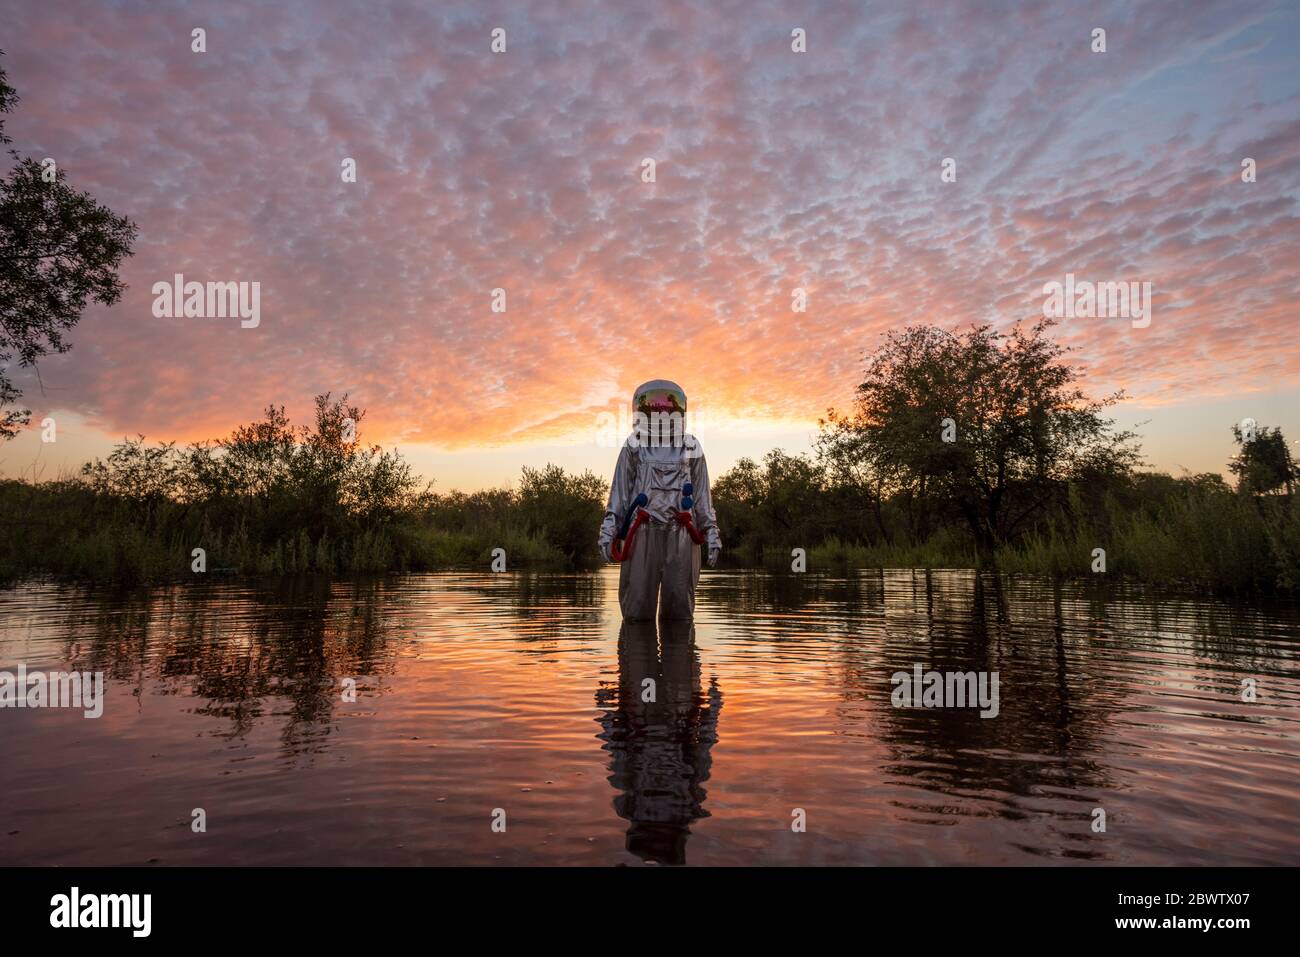 Spacewoman standing in water at sunset Stock Photo